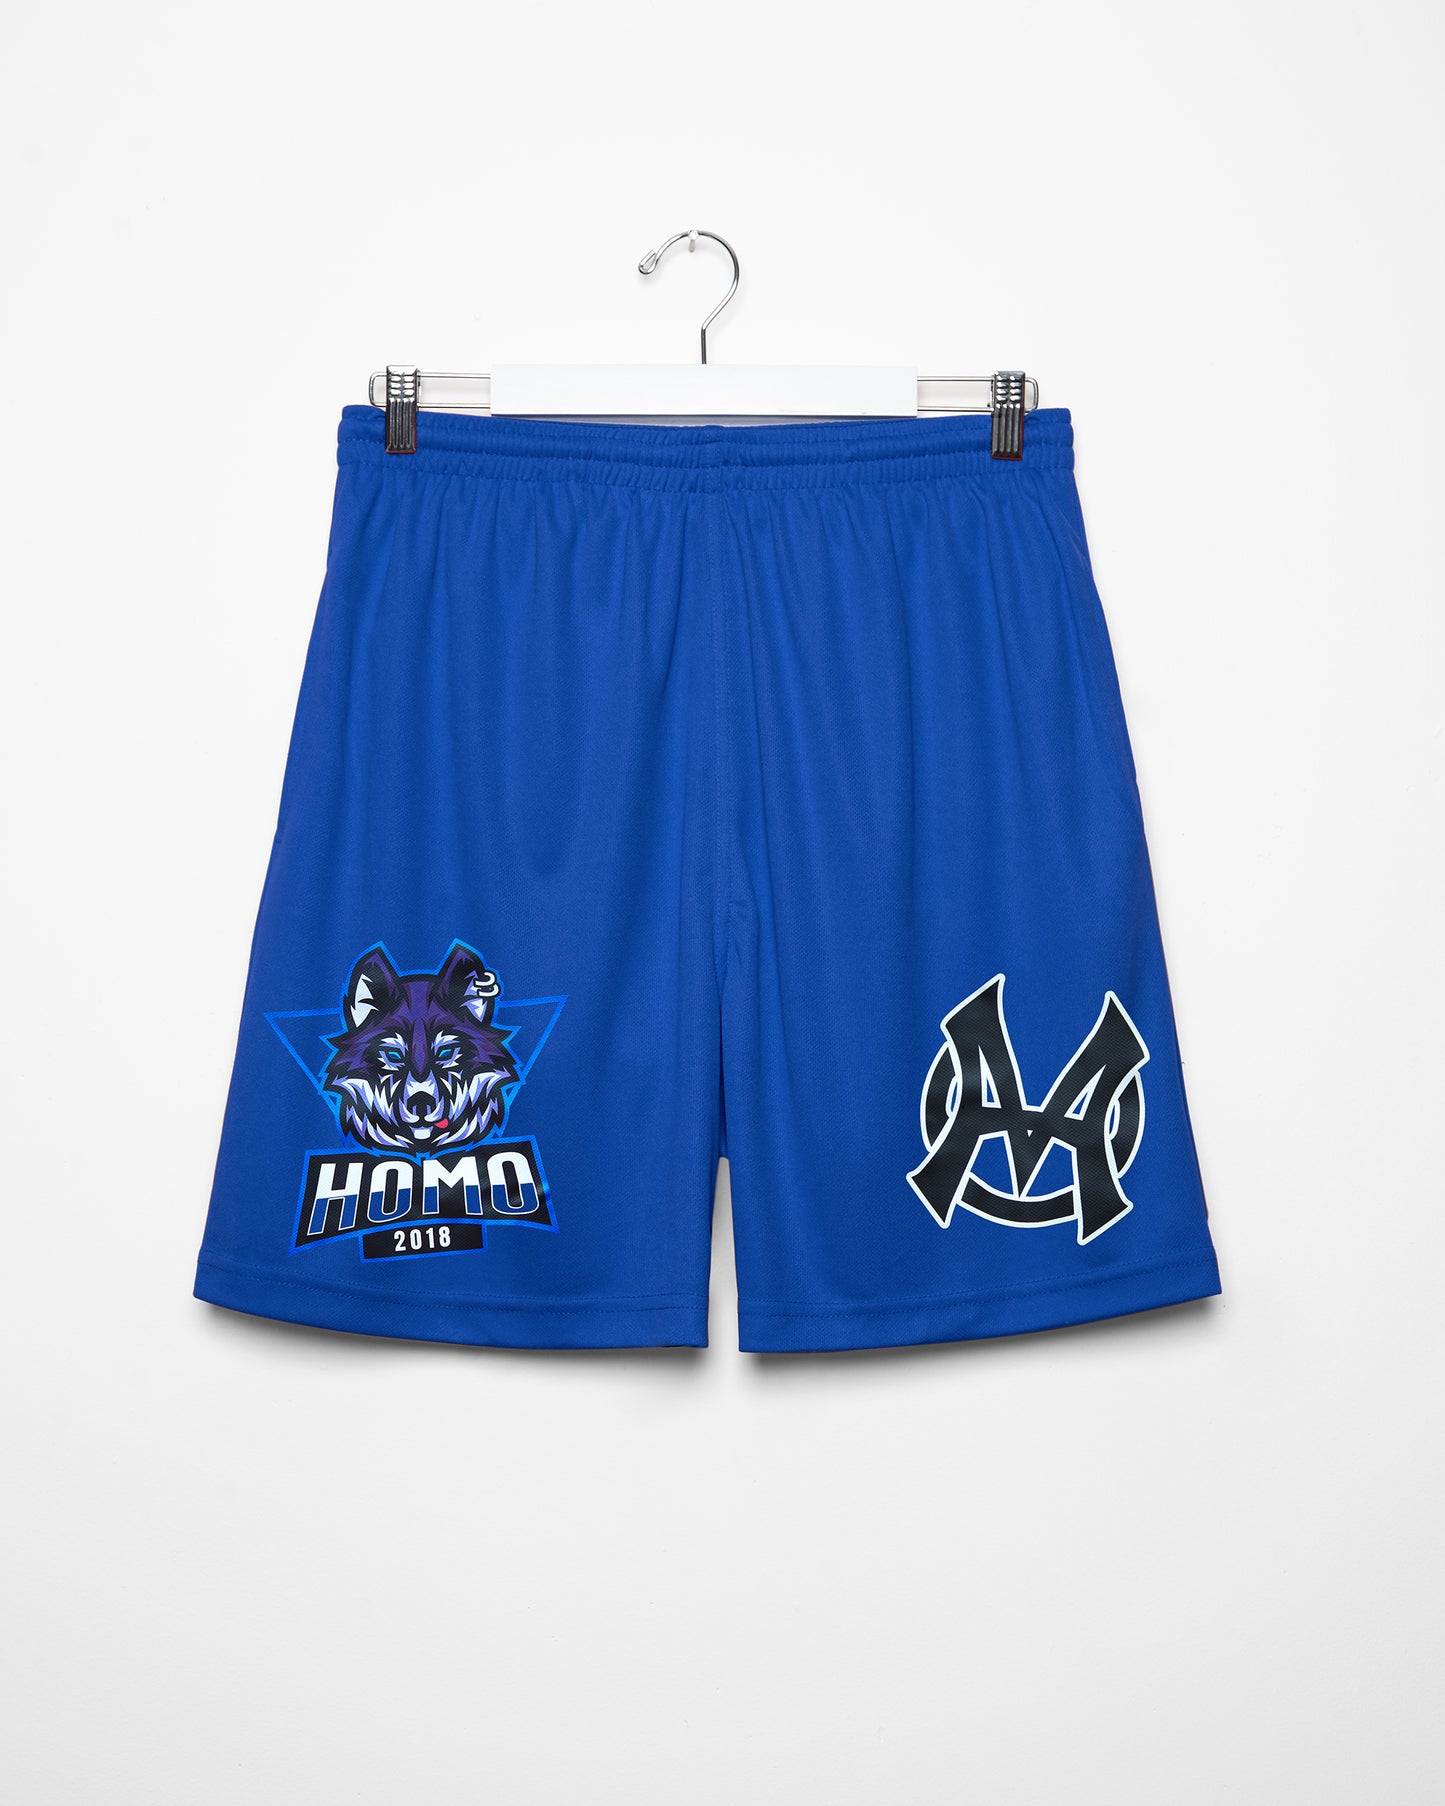 Double pack - sporty wolf, blue - sideless tee & basketball shorts - full outfit.